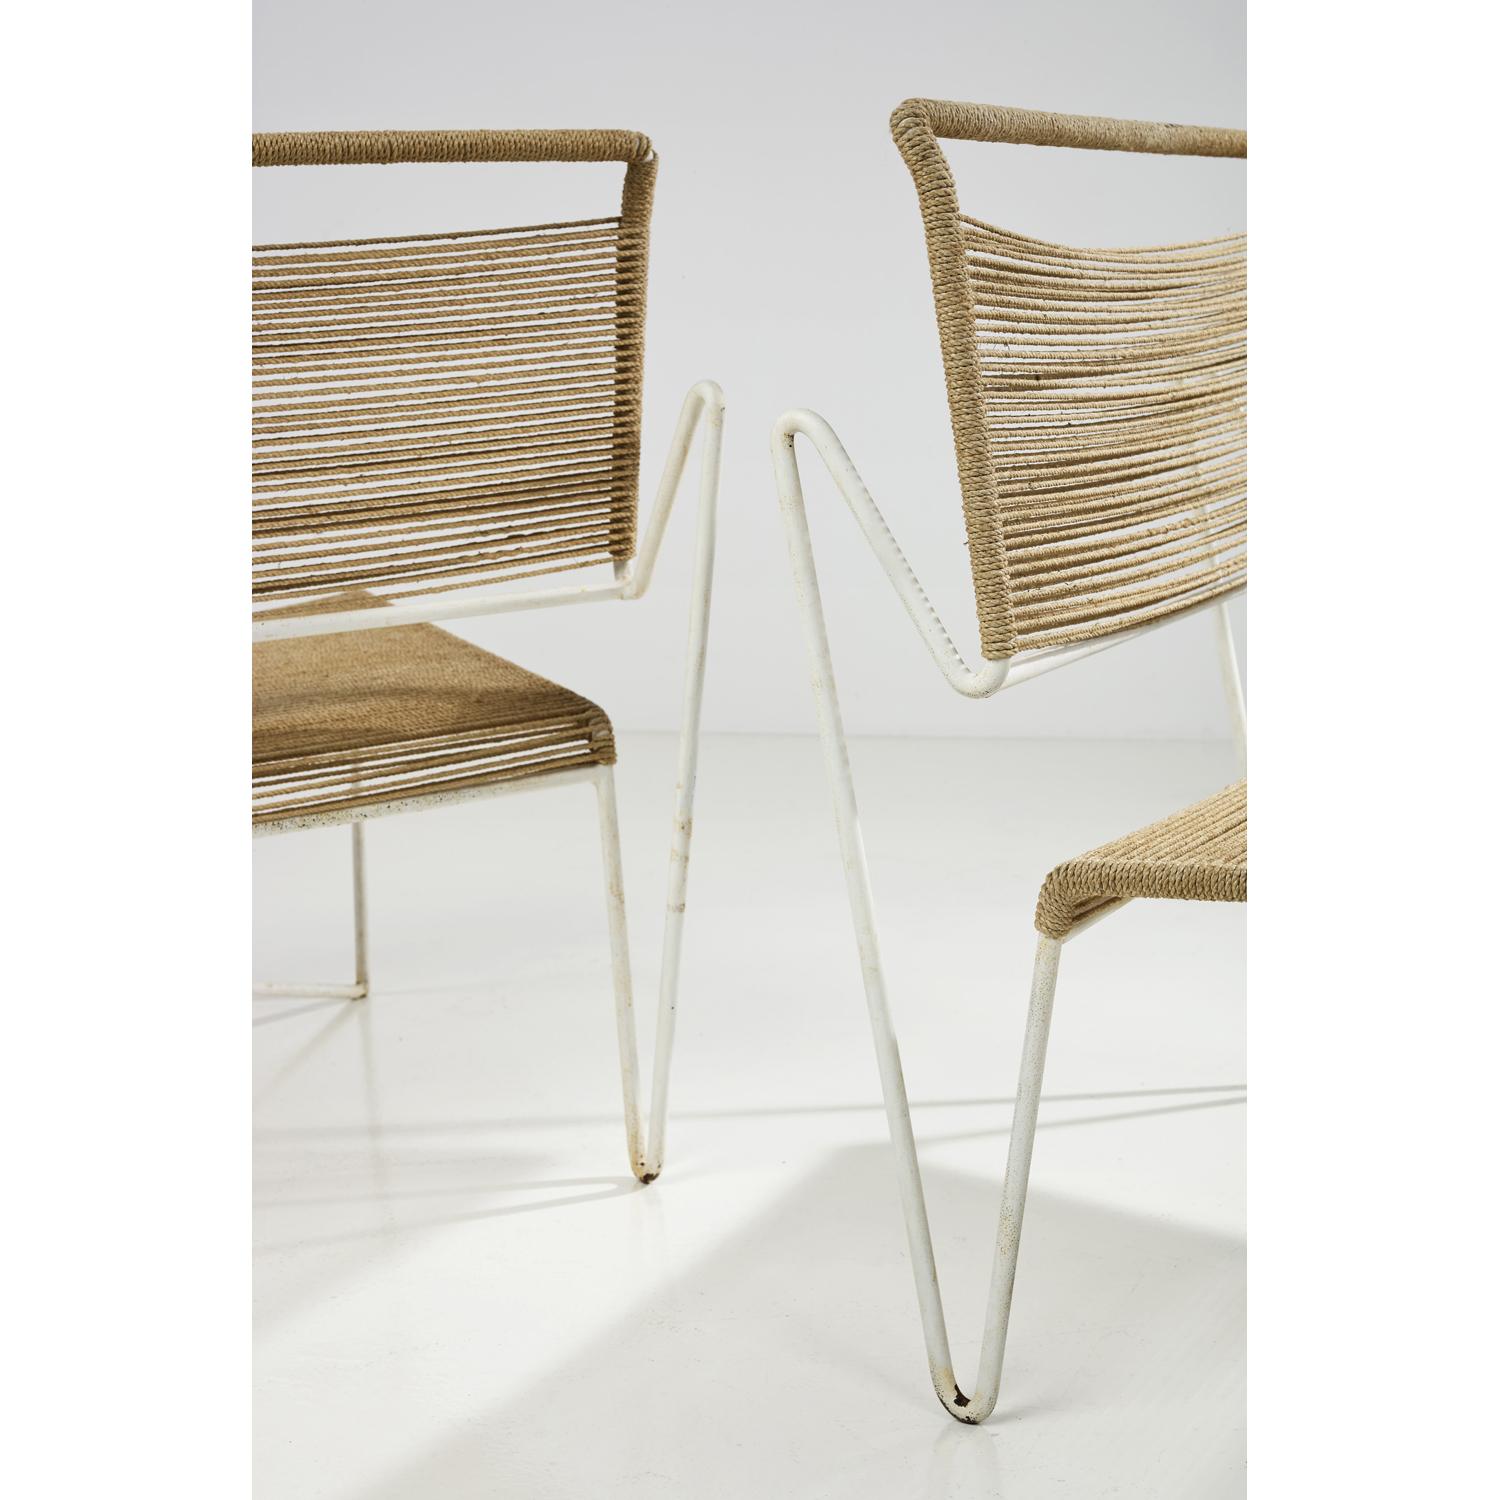 
Clara Porset (1895-1981) - Xavier Guerrero (1896-1974)
Pair of armchairs
Rope and lacquered metal
Model created circa 1950
Measures: H: 79 x W 70 x D 69 cm

This chair model is part of the selection of the 1950 international low-cost furniture